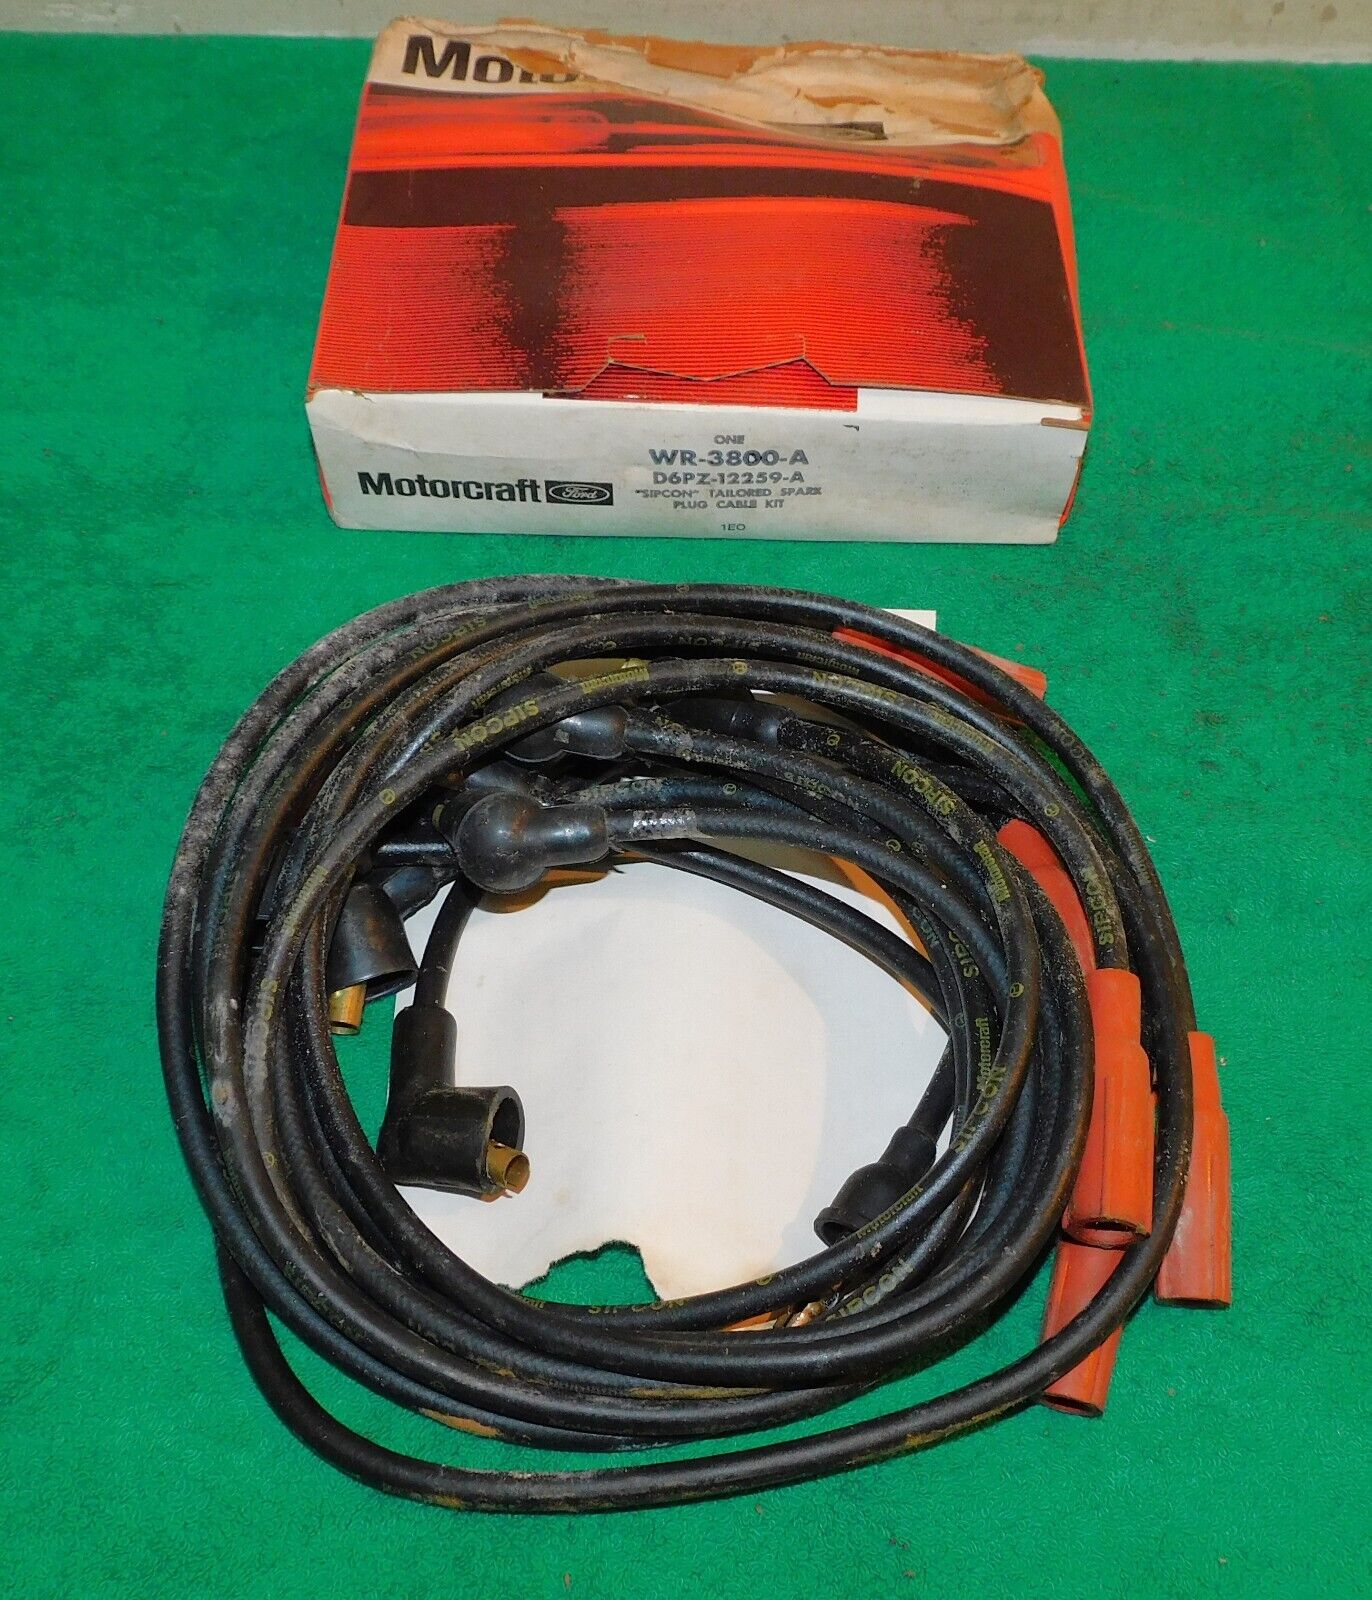 1967 1969 1970 Mustang Shelby NOS 289 HIPO 428CJ BOSS 302 SPARK PLUG WIRE CABLES